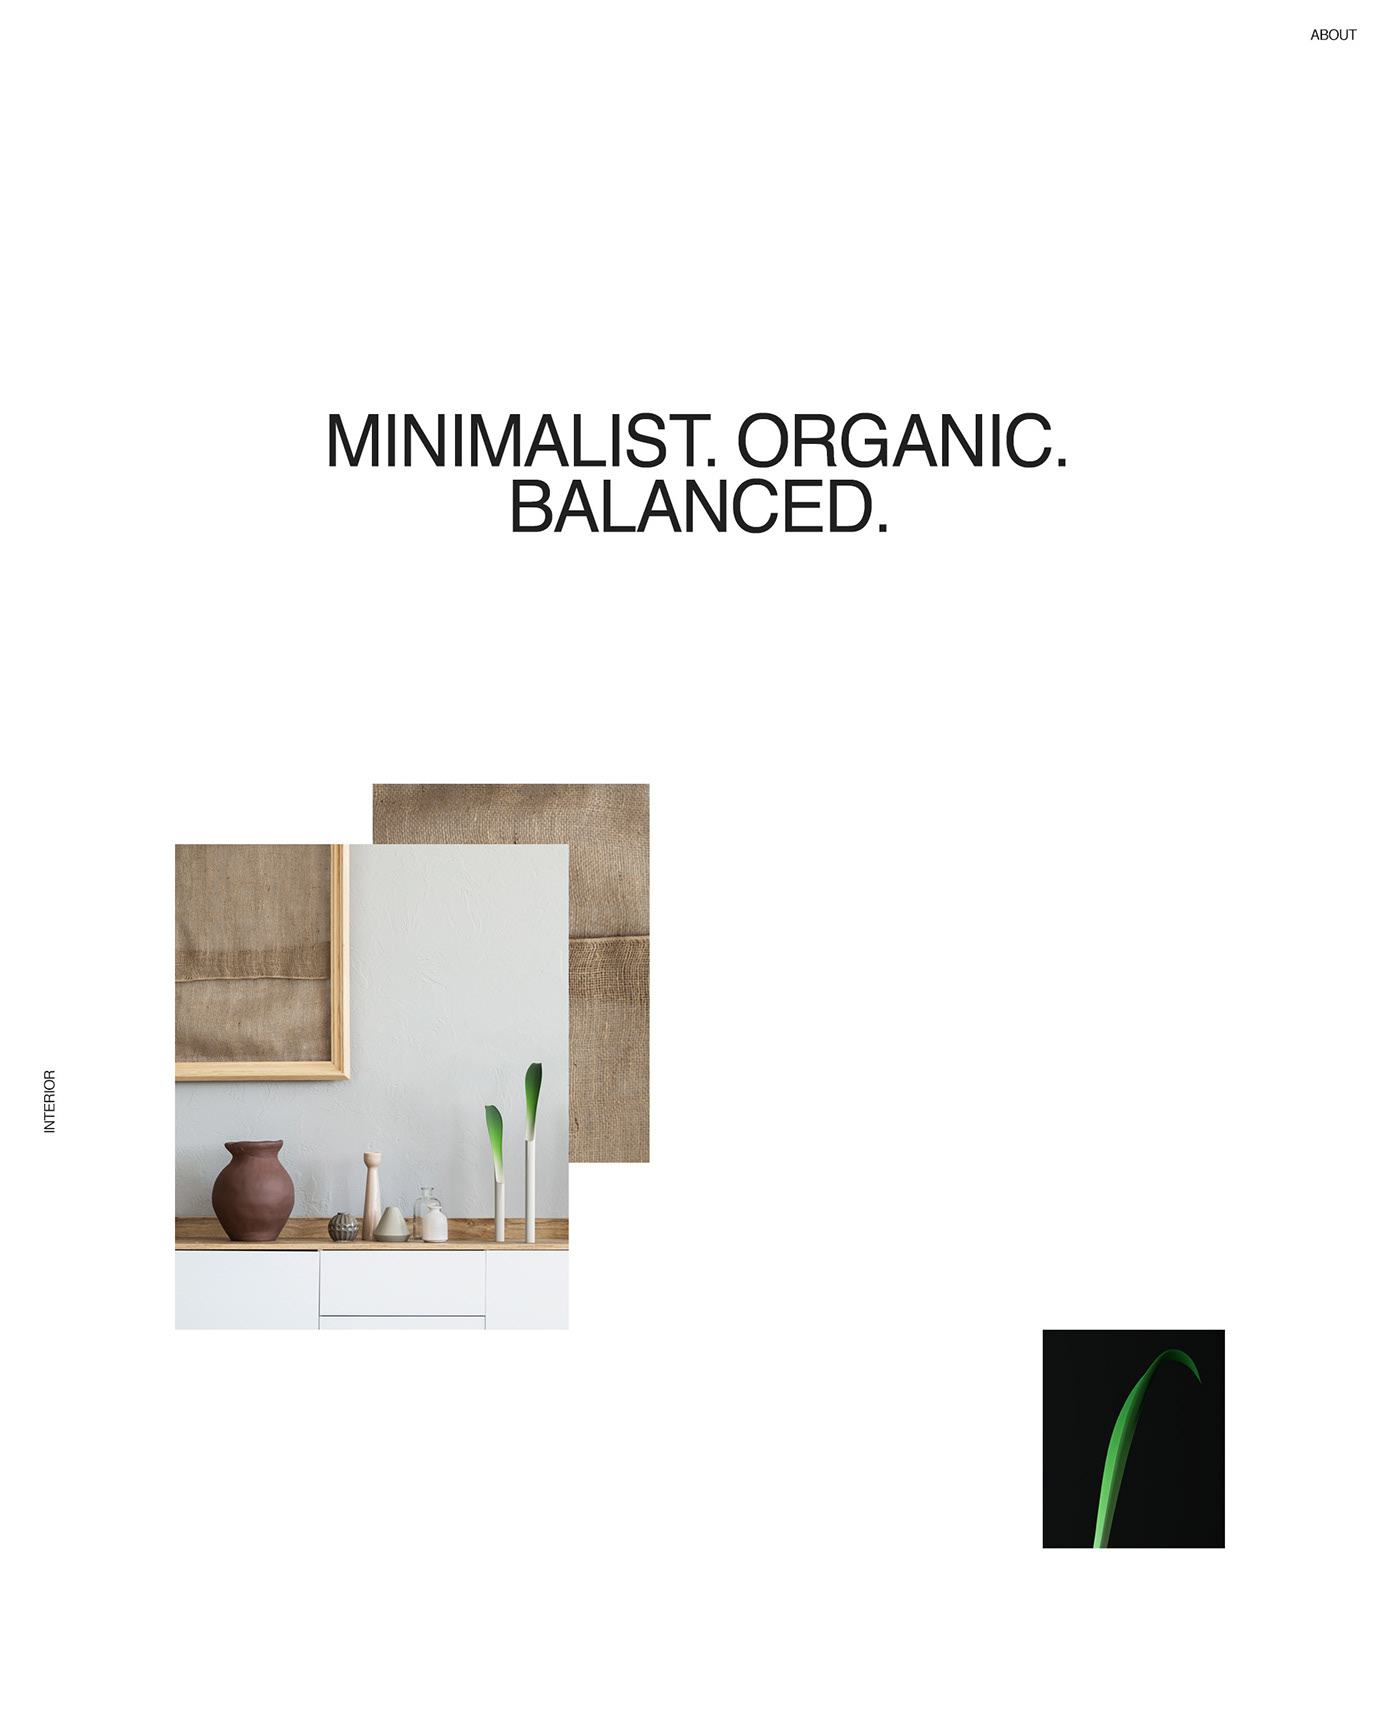 minimal Vase product Interior organic clean clear promo concept typography  